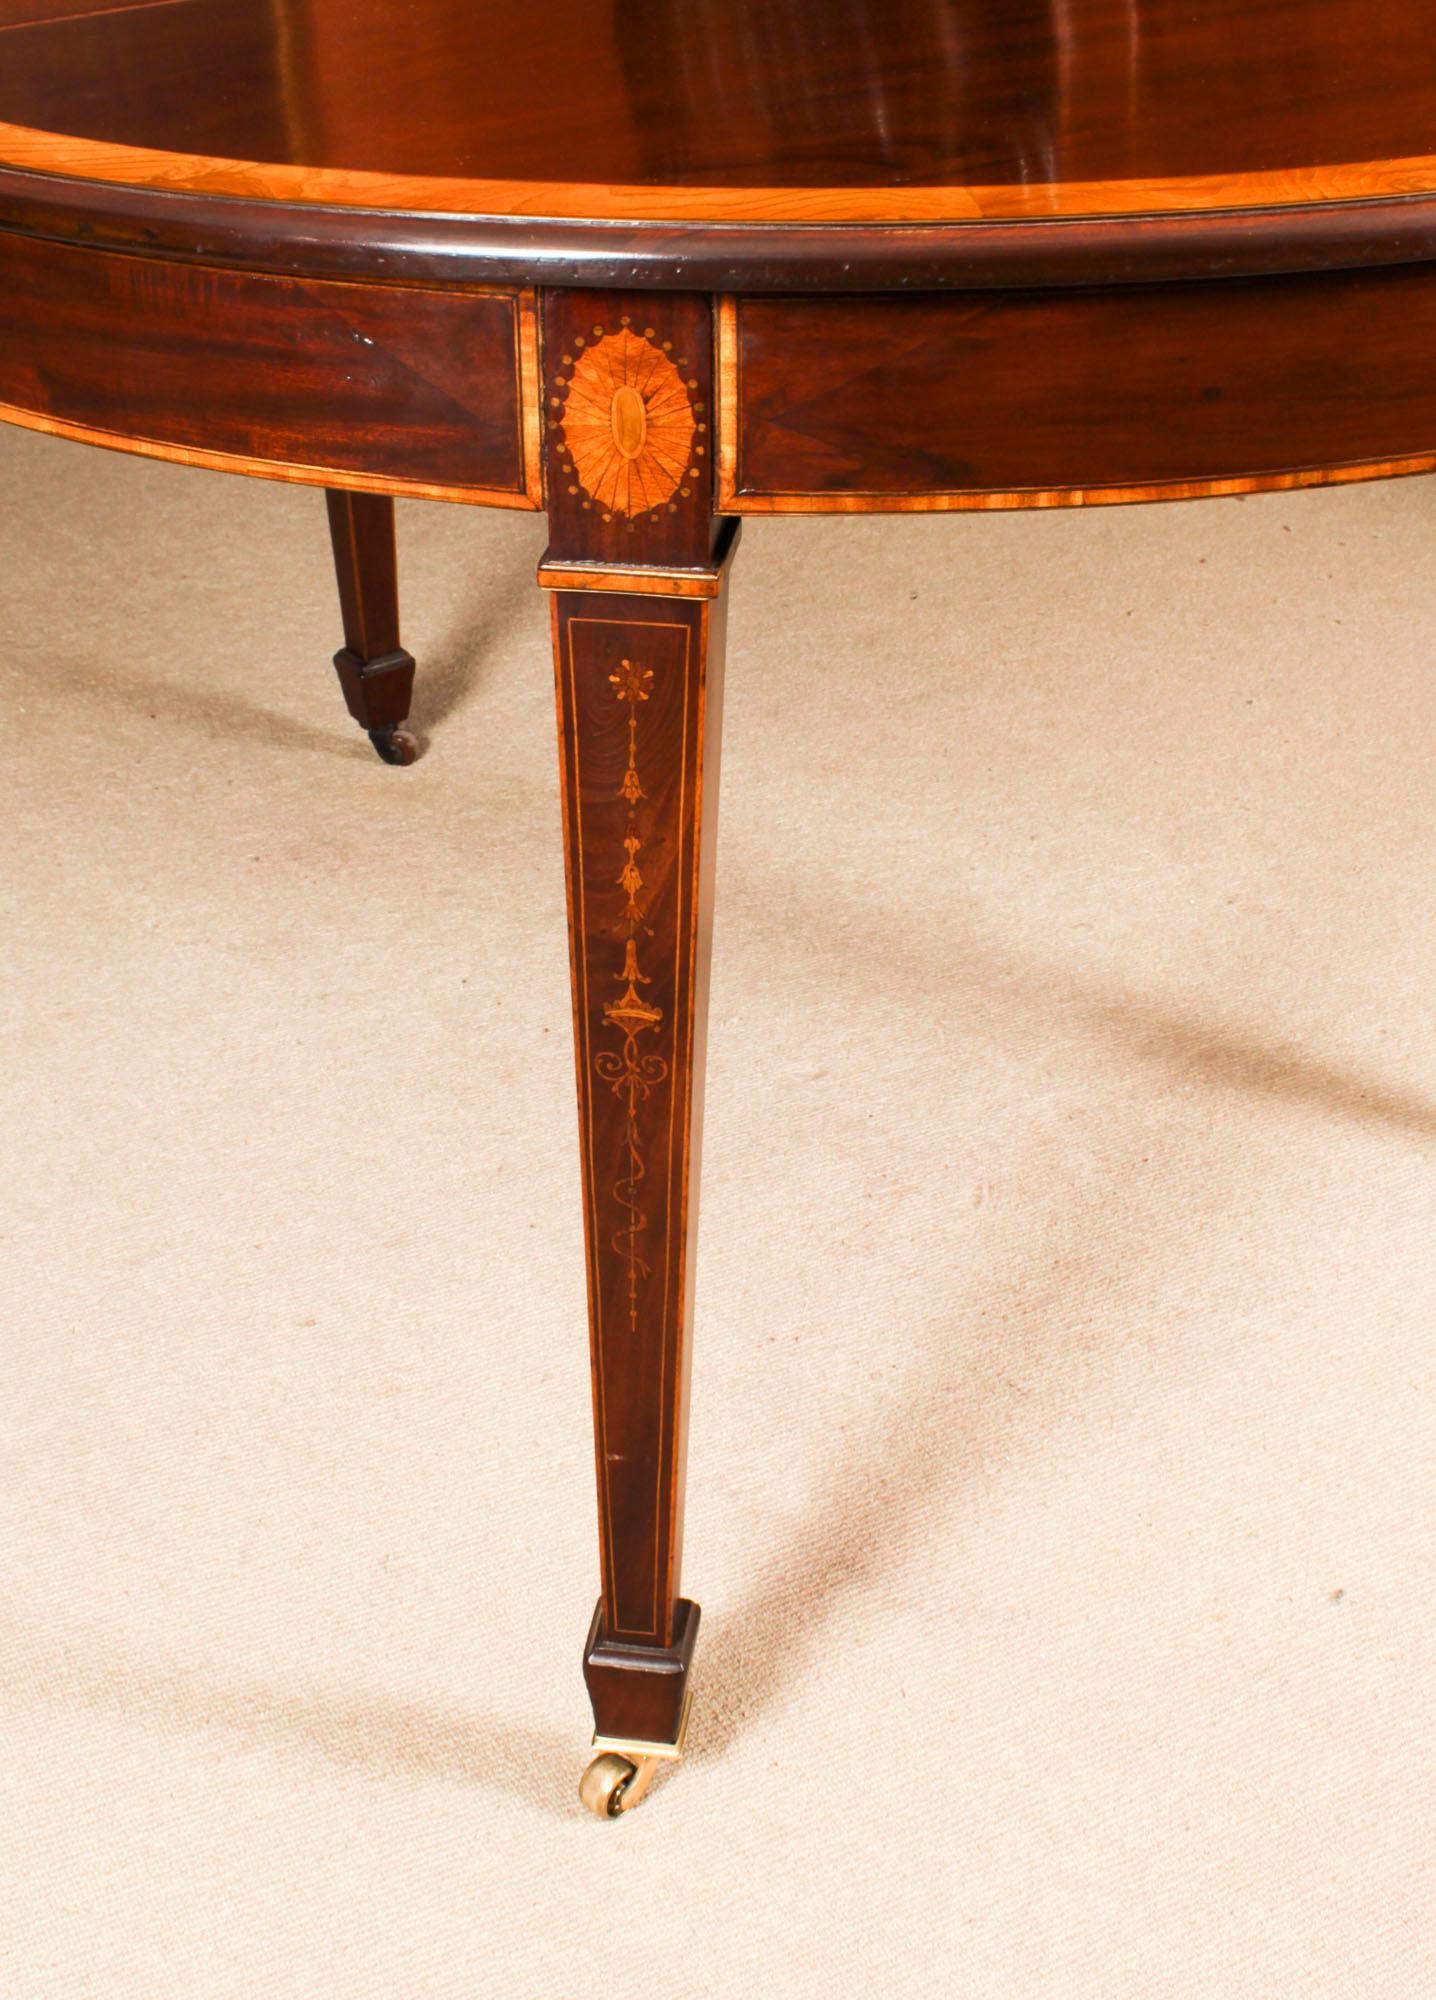 Antique Edwardian Inlaid Flame Mahogany Extending Dining Table Early 20th C. 9